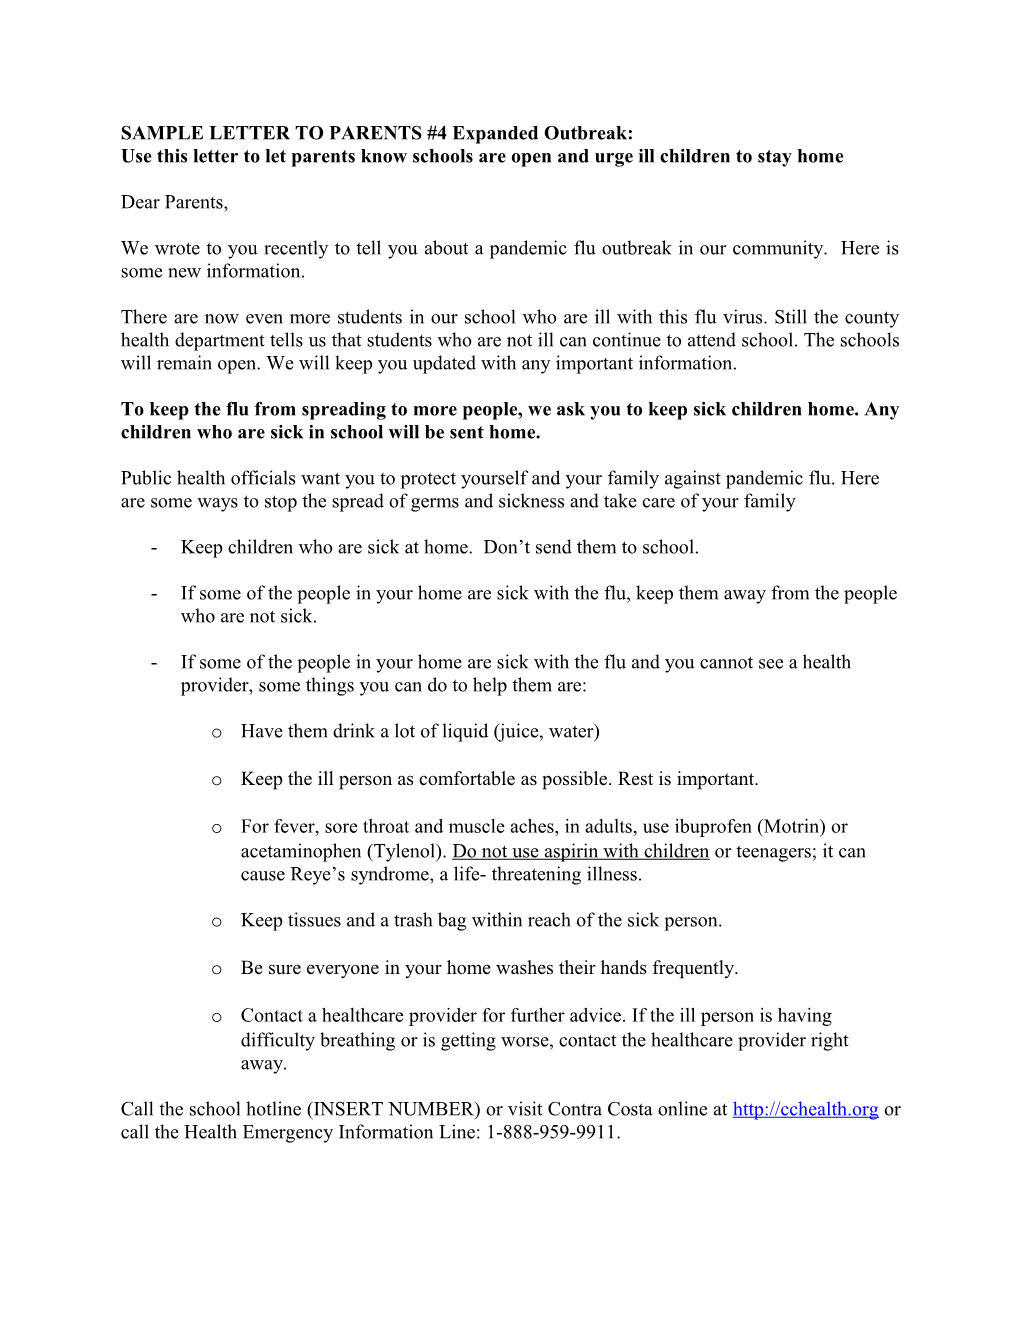 SAMPLE LETTER to PARENTS #4 Expanded Outbreak